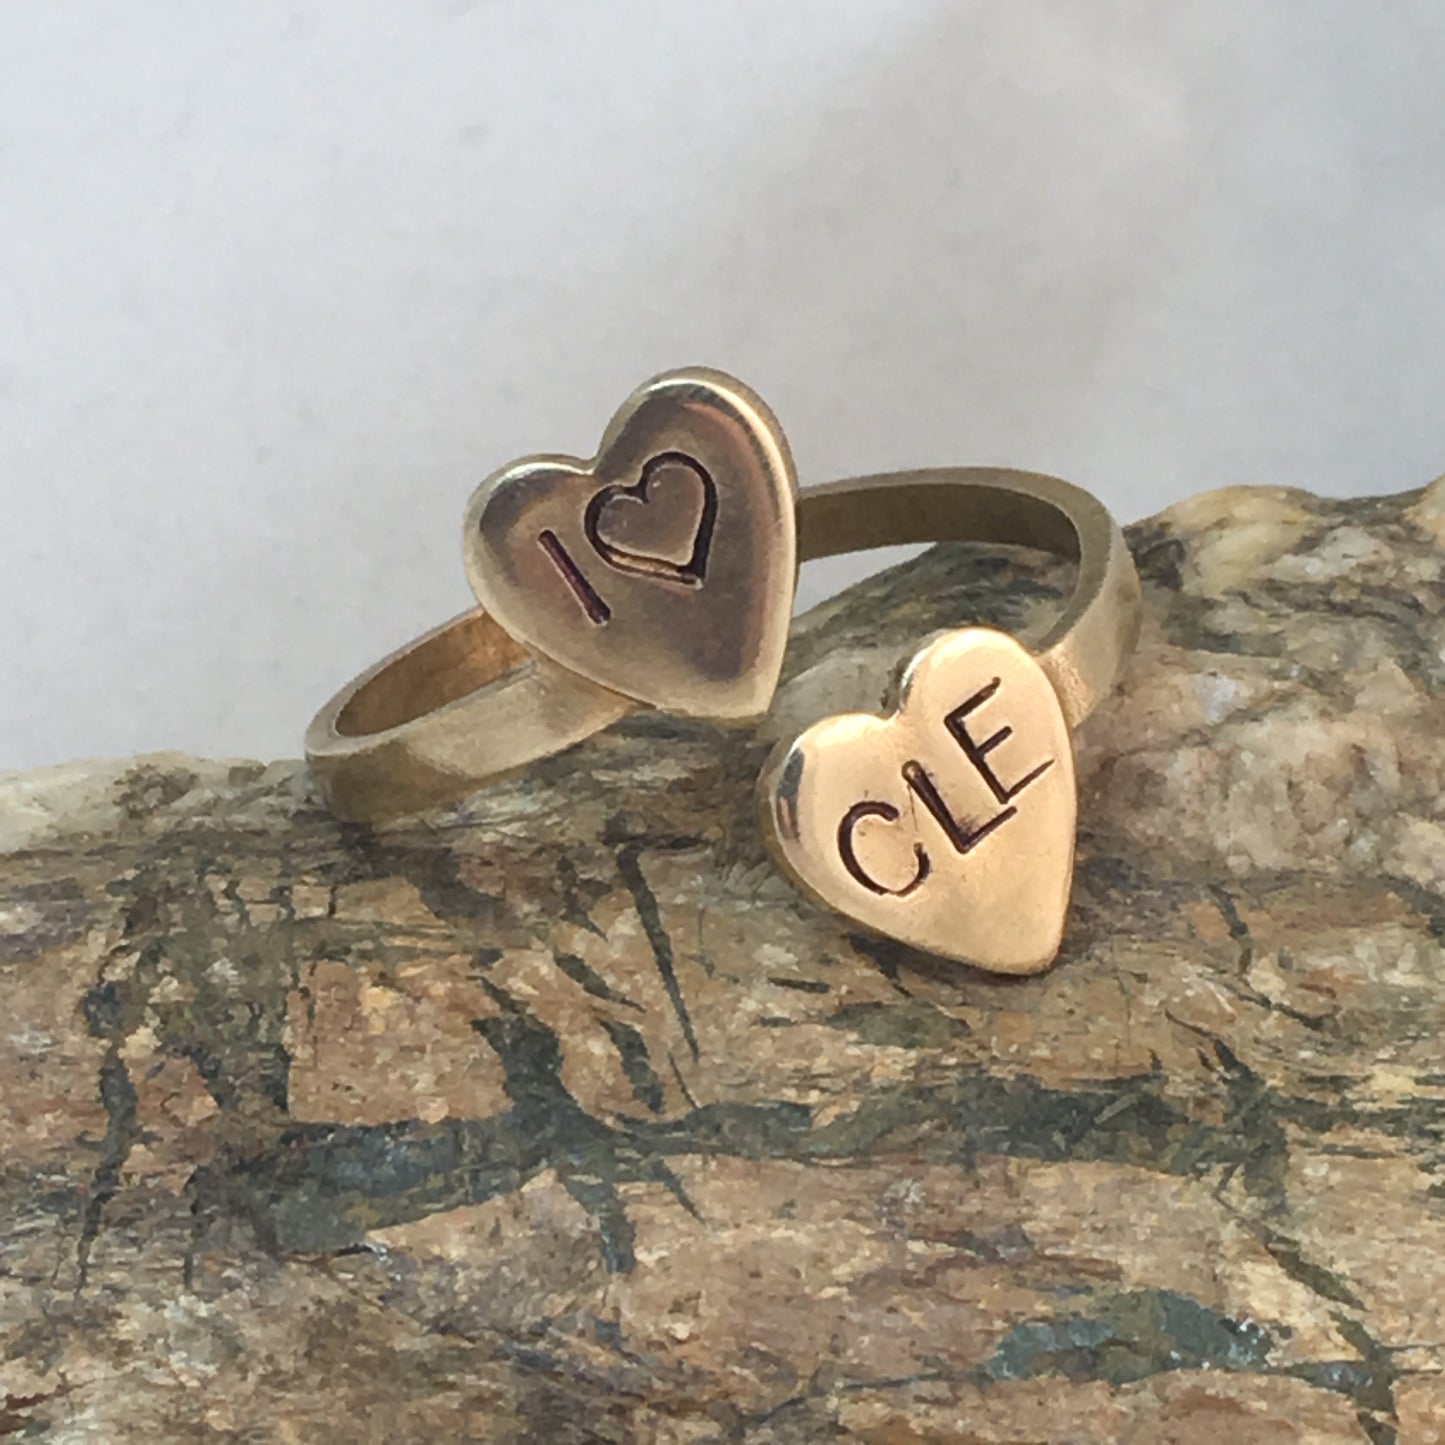 I love CLE ring, Cleveland Pride Jewelry - FREE SHIPPING!